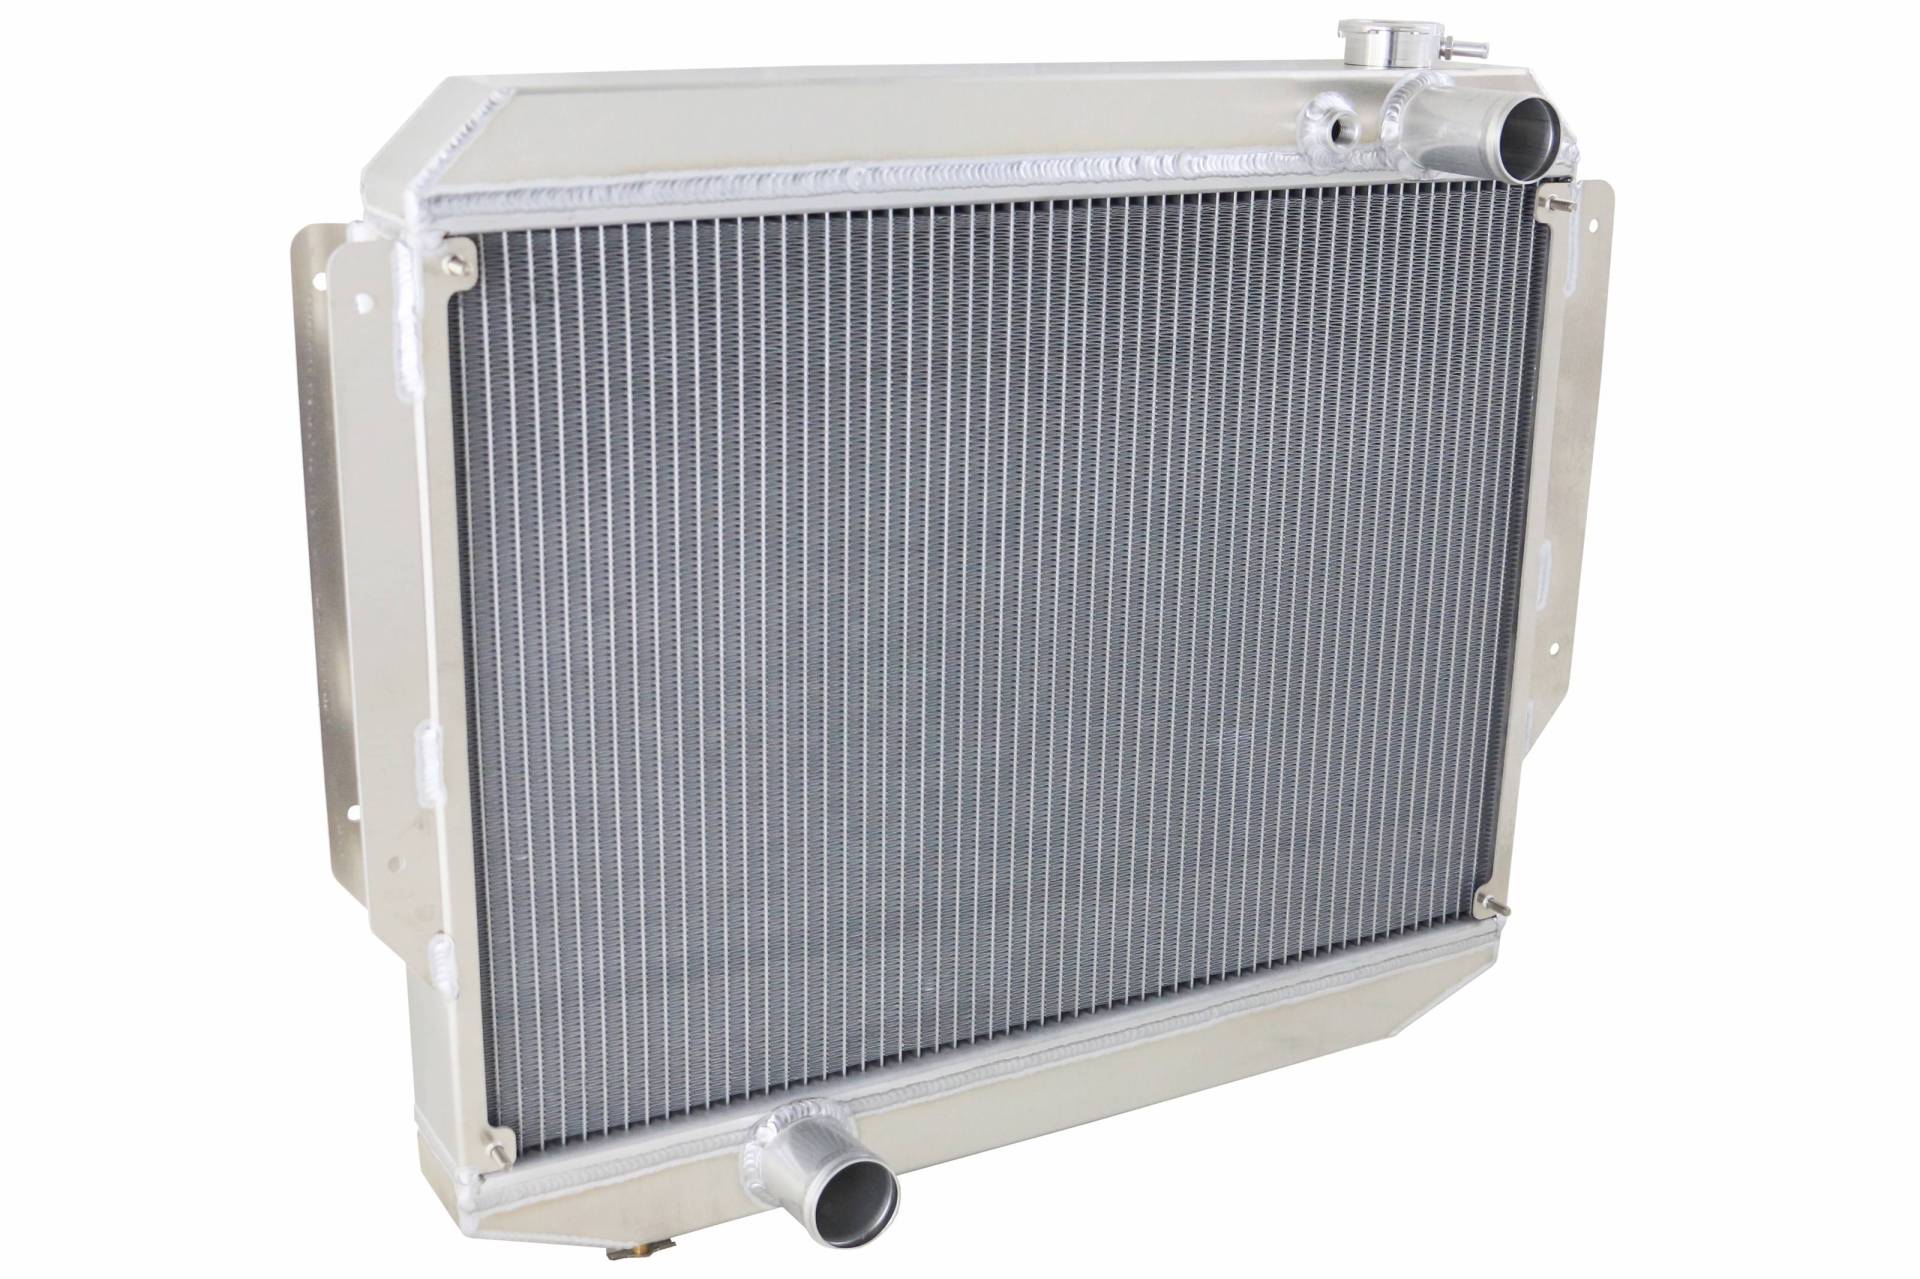 Wizard Cooling Inc - Wizard Cooling - 1958-60 Lincoln Aluminum Radiator - 41001-100